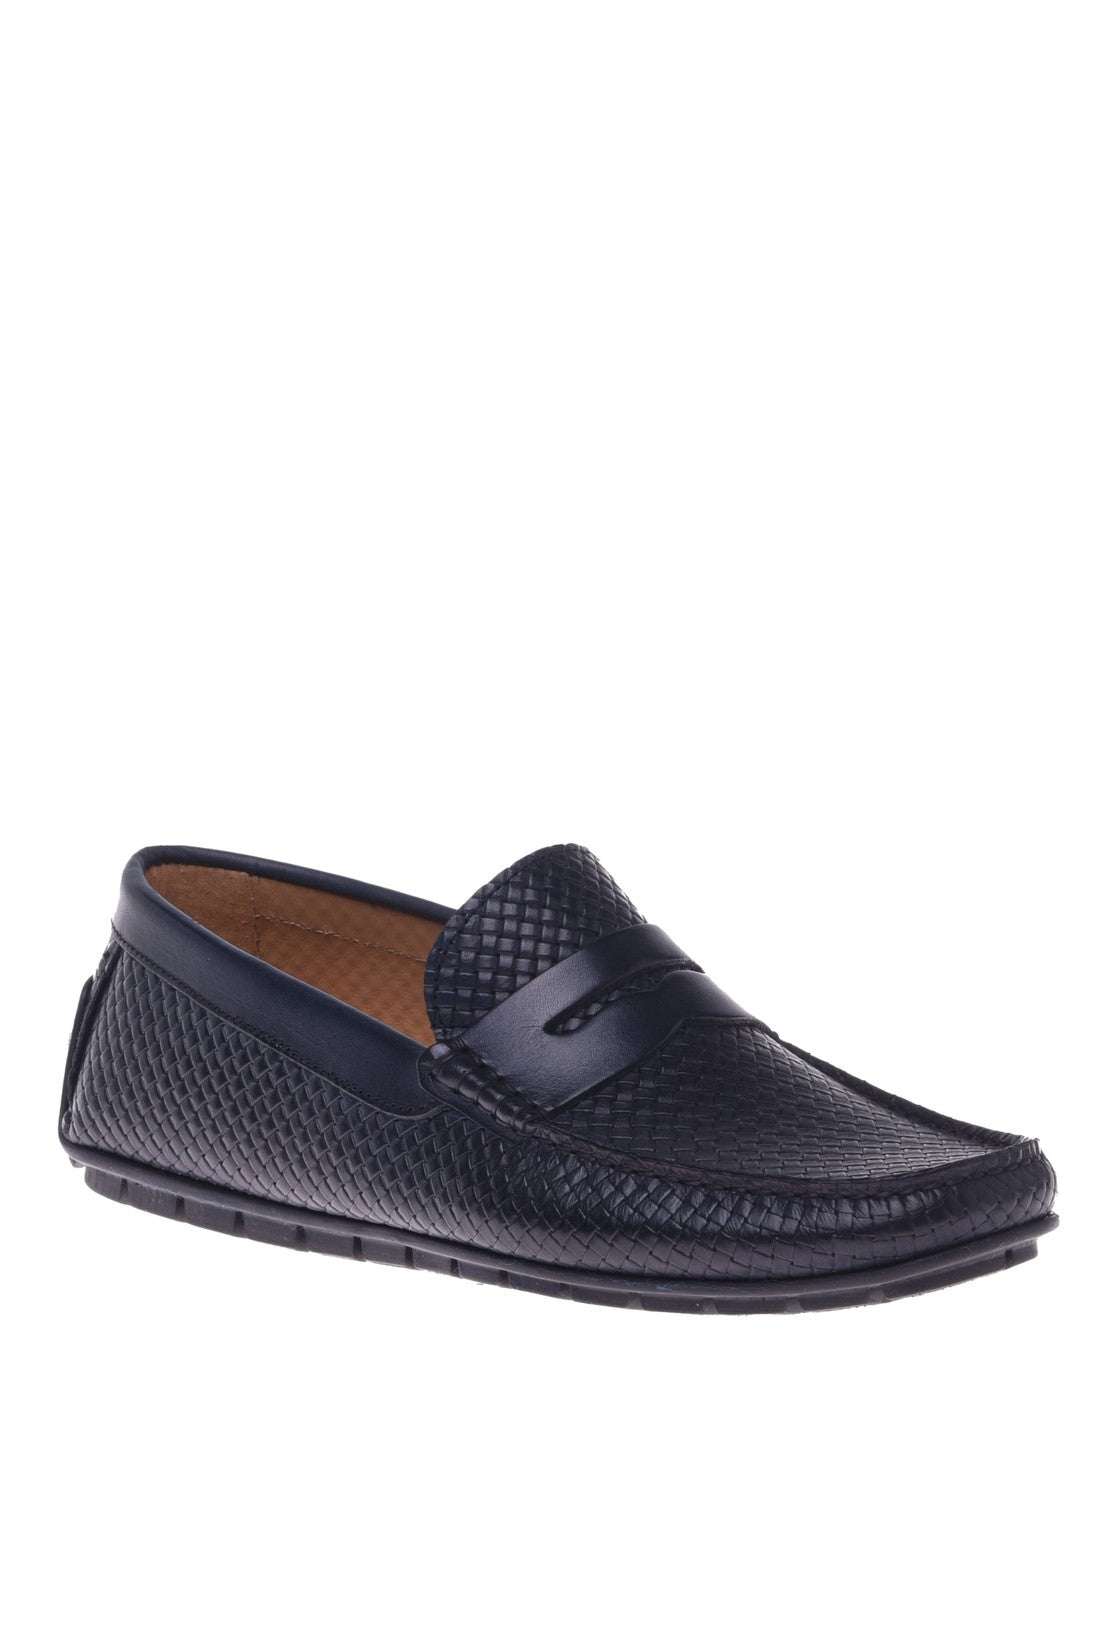 Blue woven print loafer